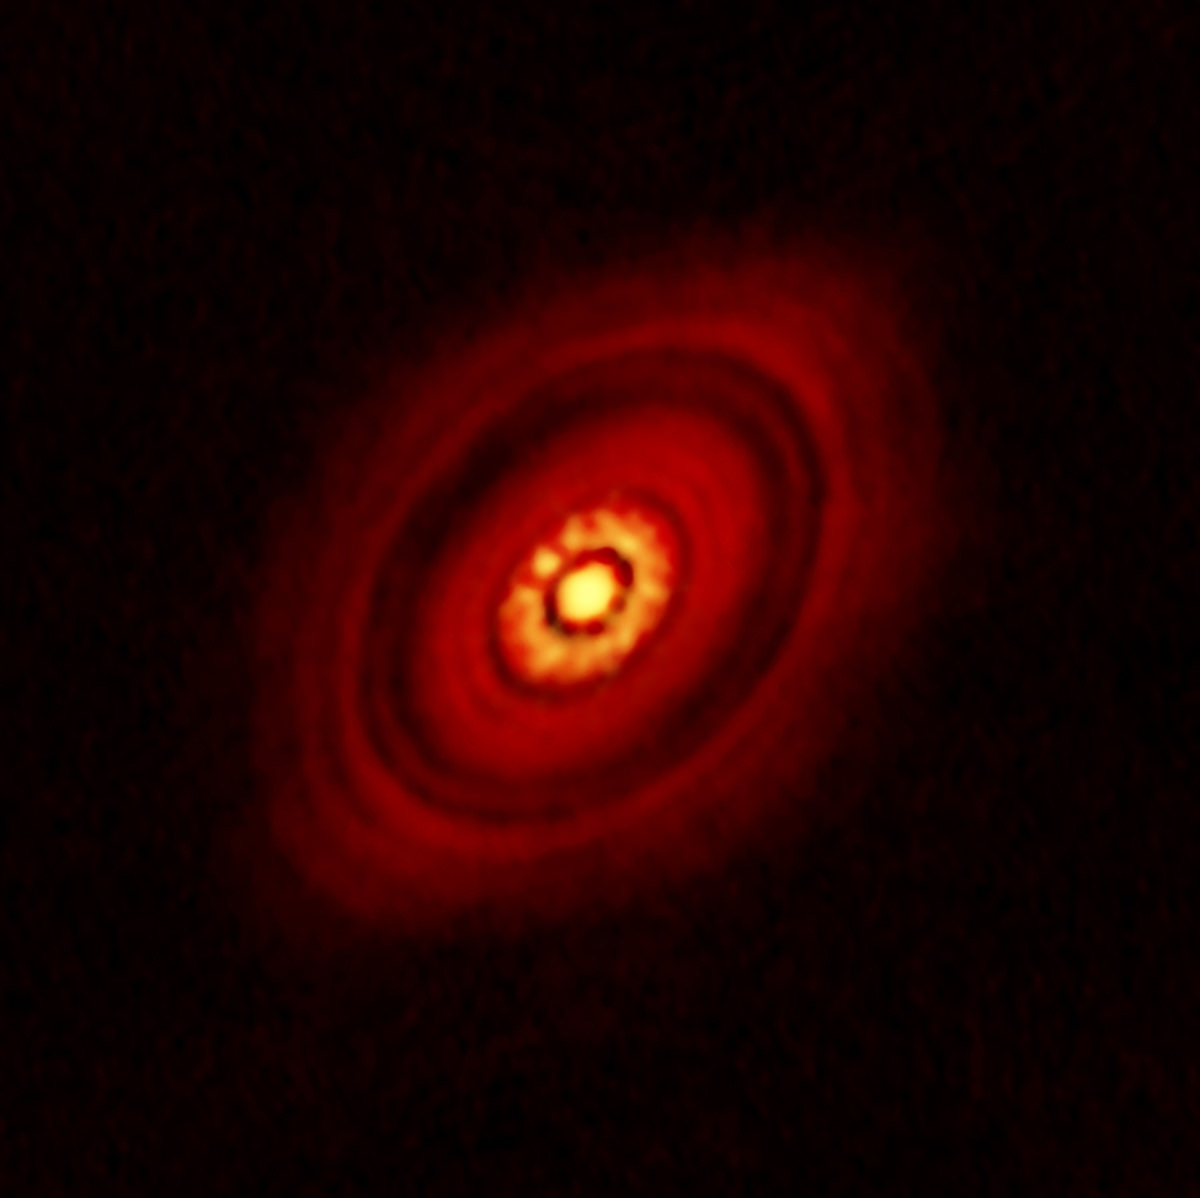 The million-year-old star HL Tau and its protoplanetary disk. Image: Carrasco-Gonzalez et. al.; Bill Saxton, NRAO/AUI/NSF